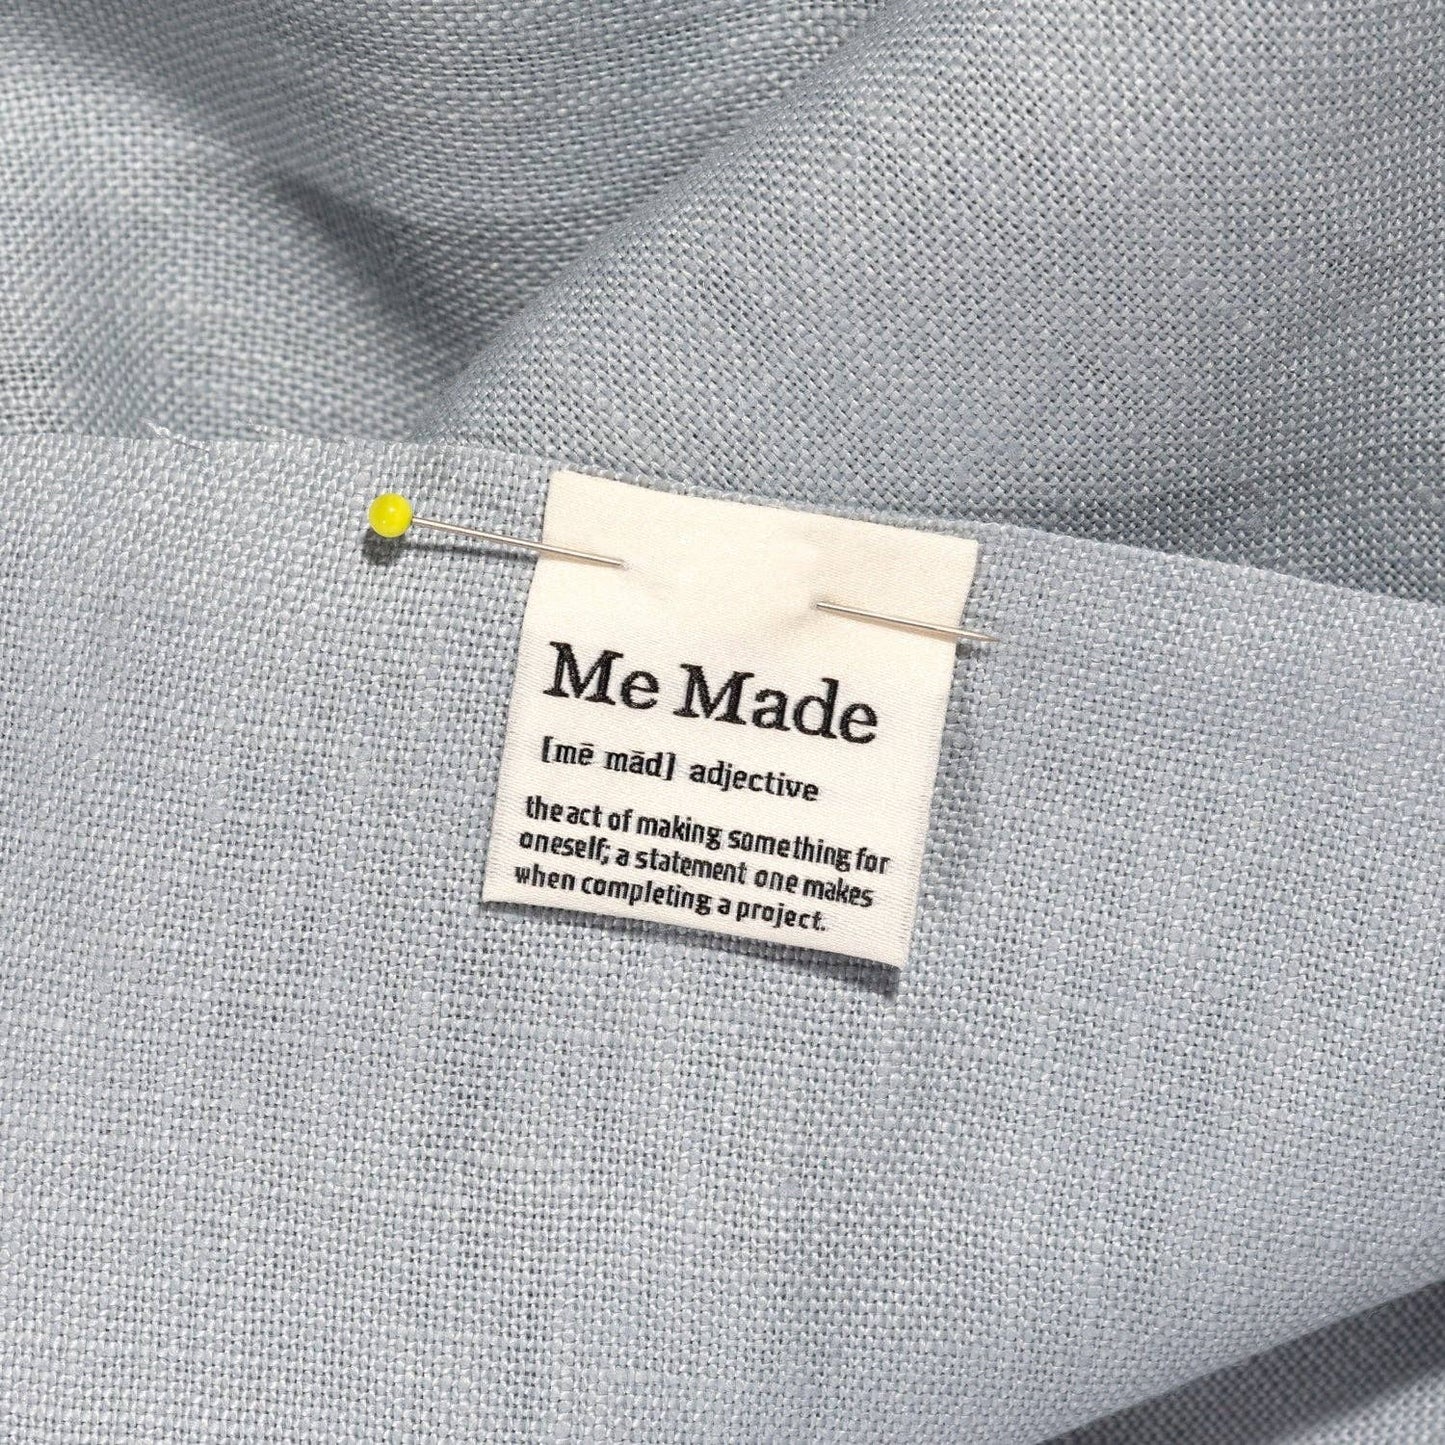 Kylie and the Machine 'Me Made' Definition Sewing Labels